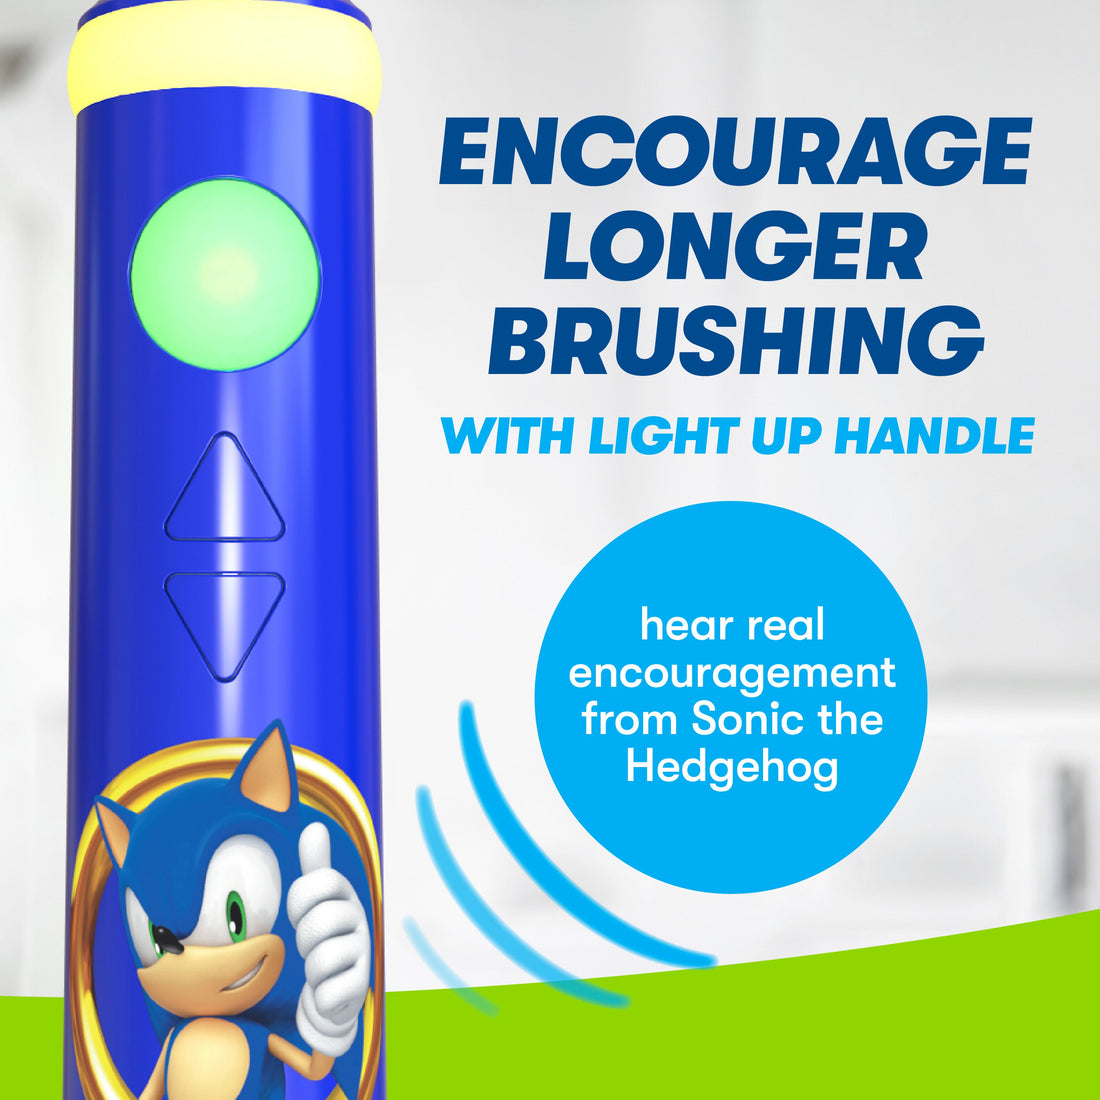 Close up of Firefly Play Action Sonic the Hedgehog Toothbrush handle. Encourage longer brushing with light up handle. Icon: Hear real encouragement from Sonic the Hedgehog